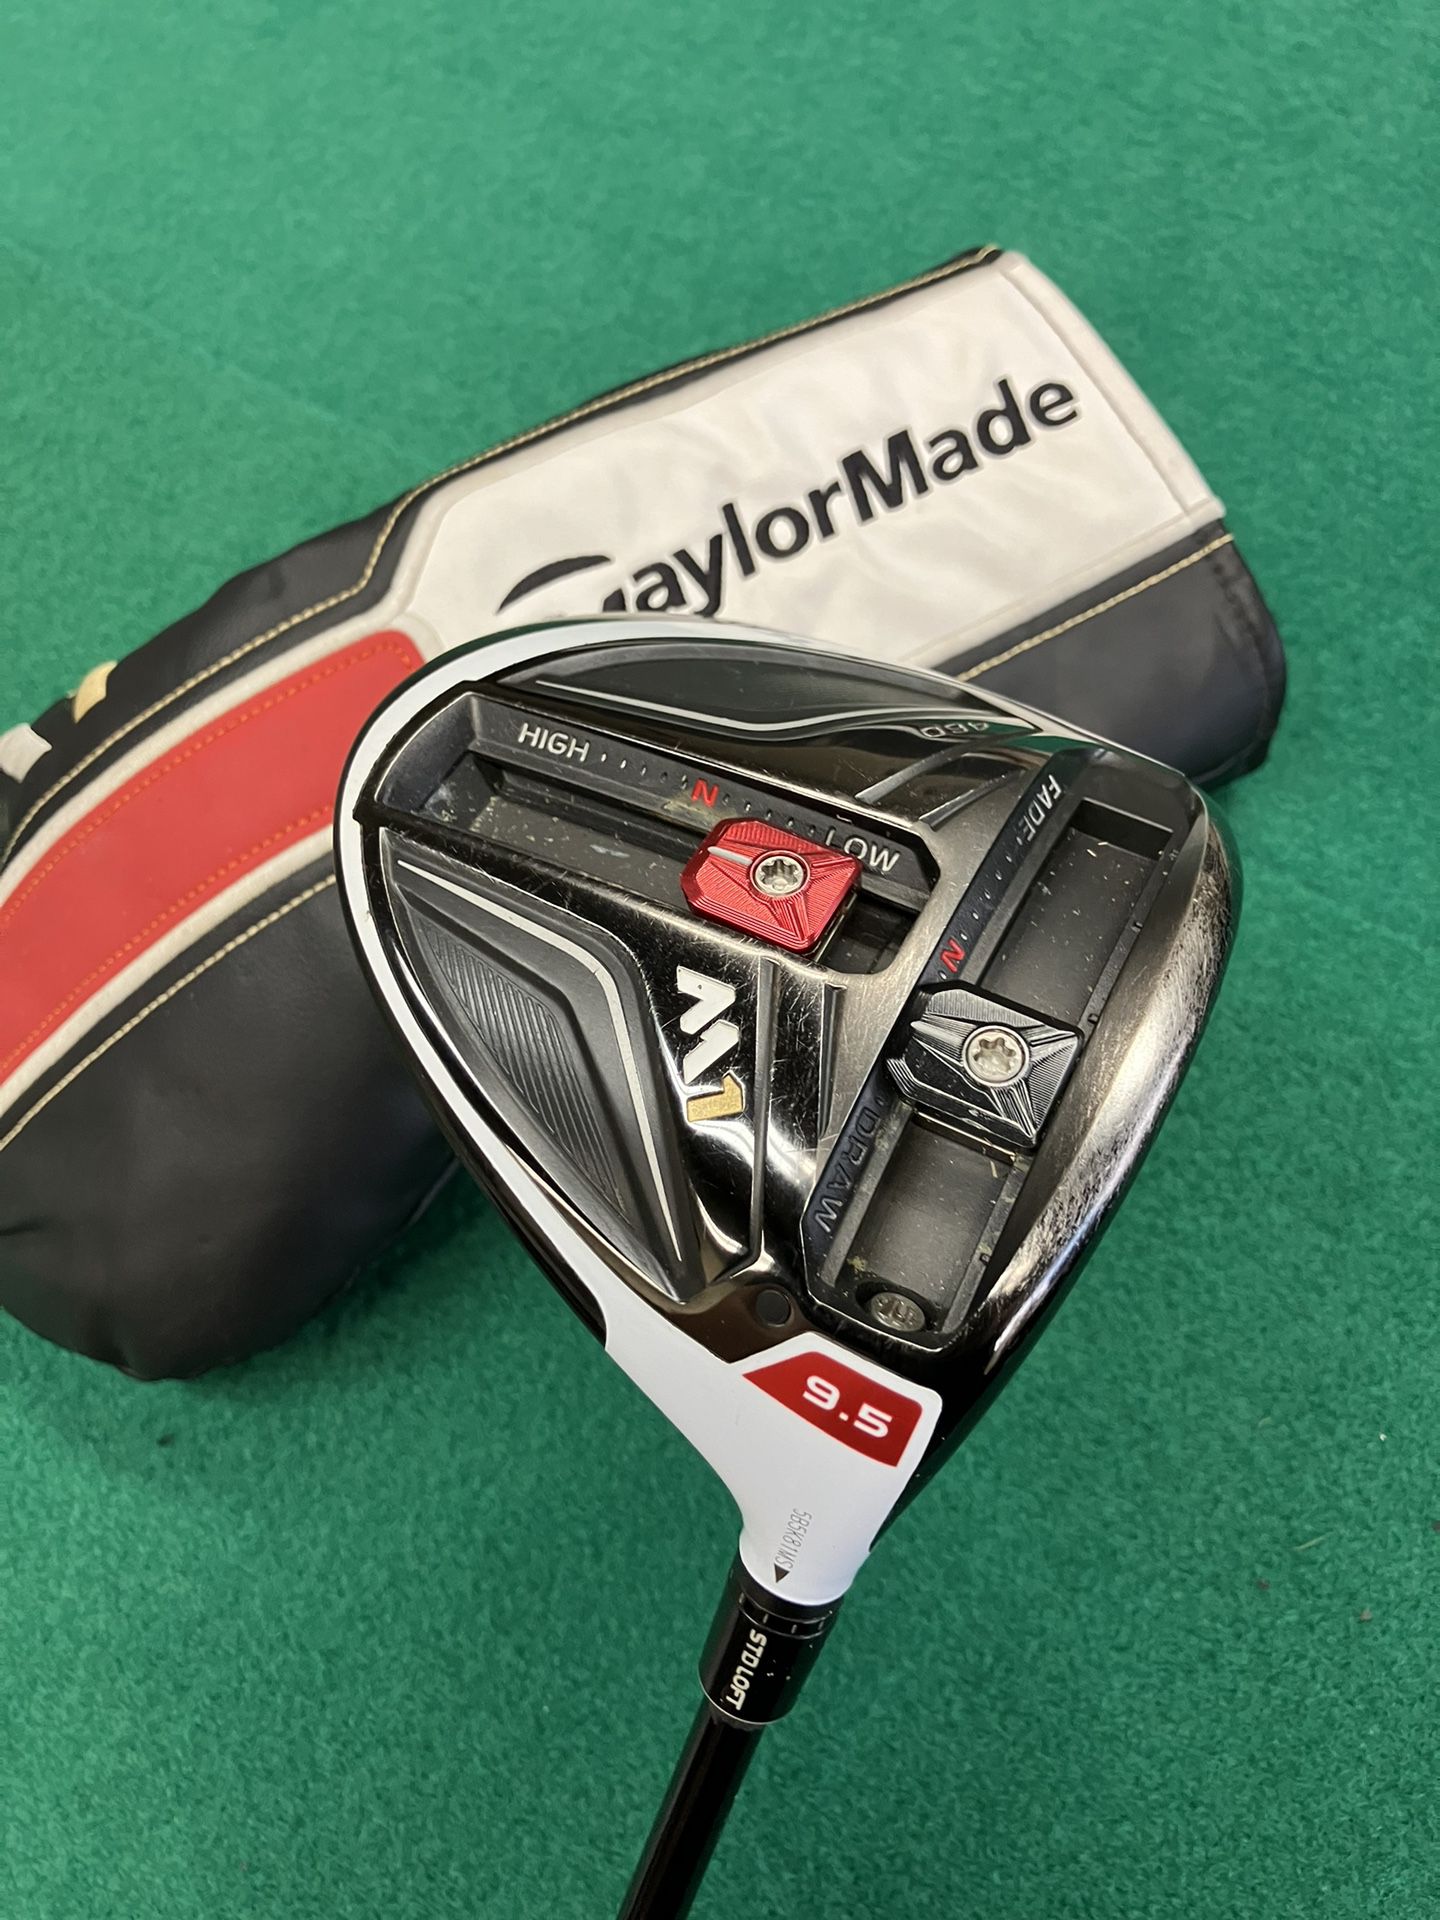 TaylorMade Driver Mint Condition Golf Club